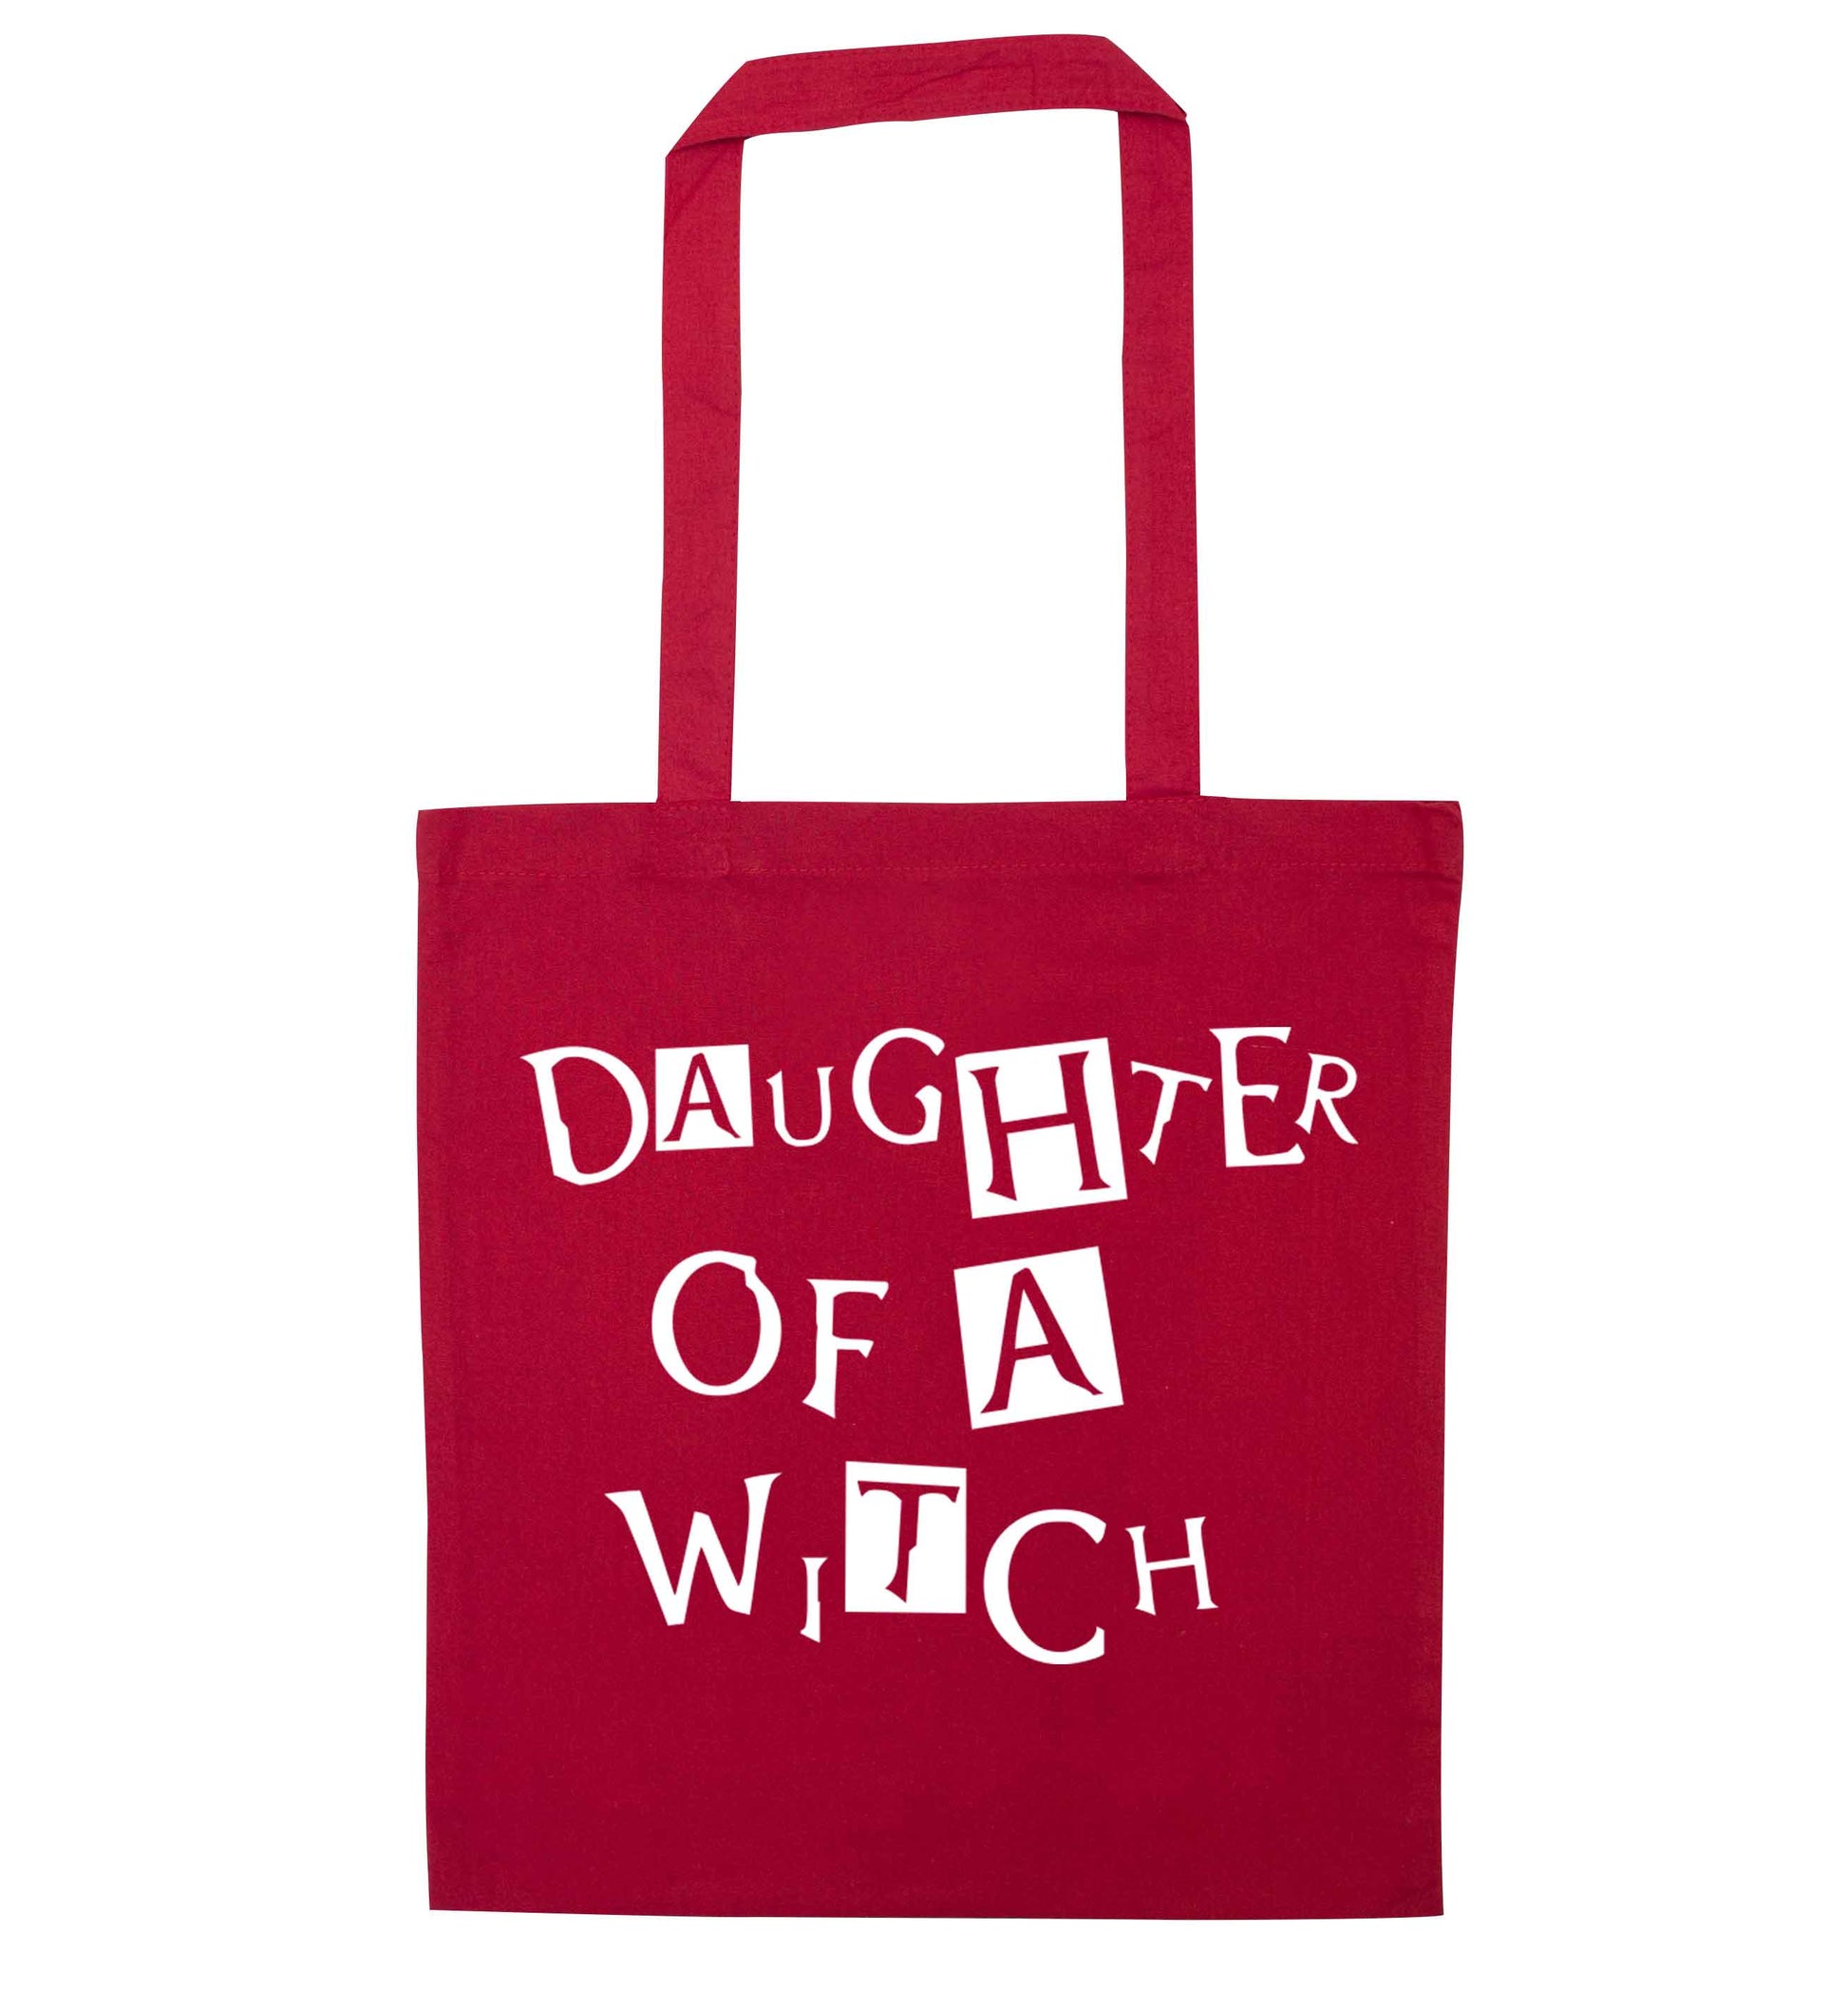 Daughter of a witch red tote bag